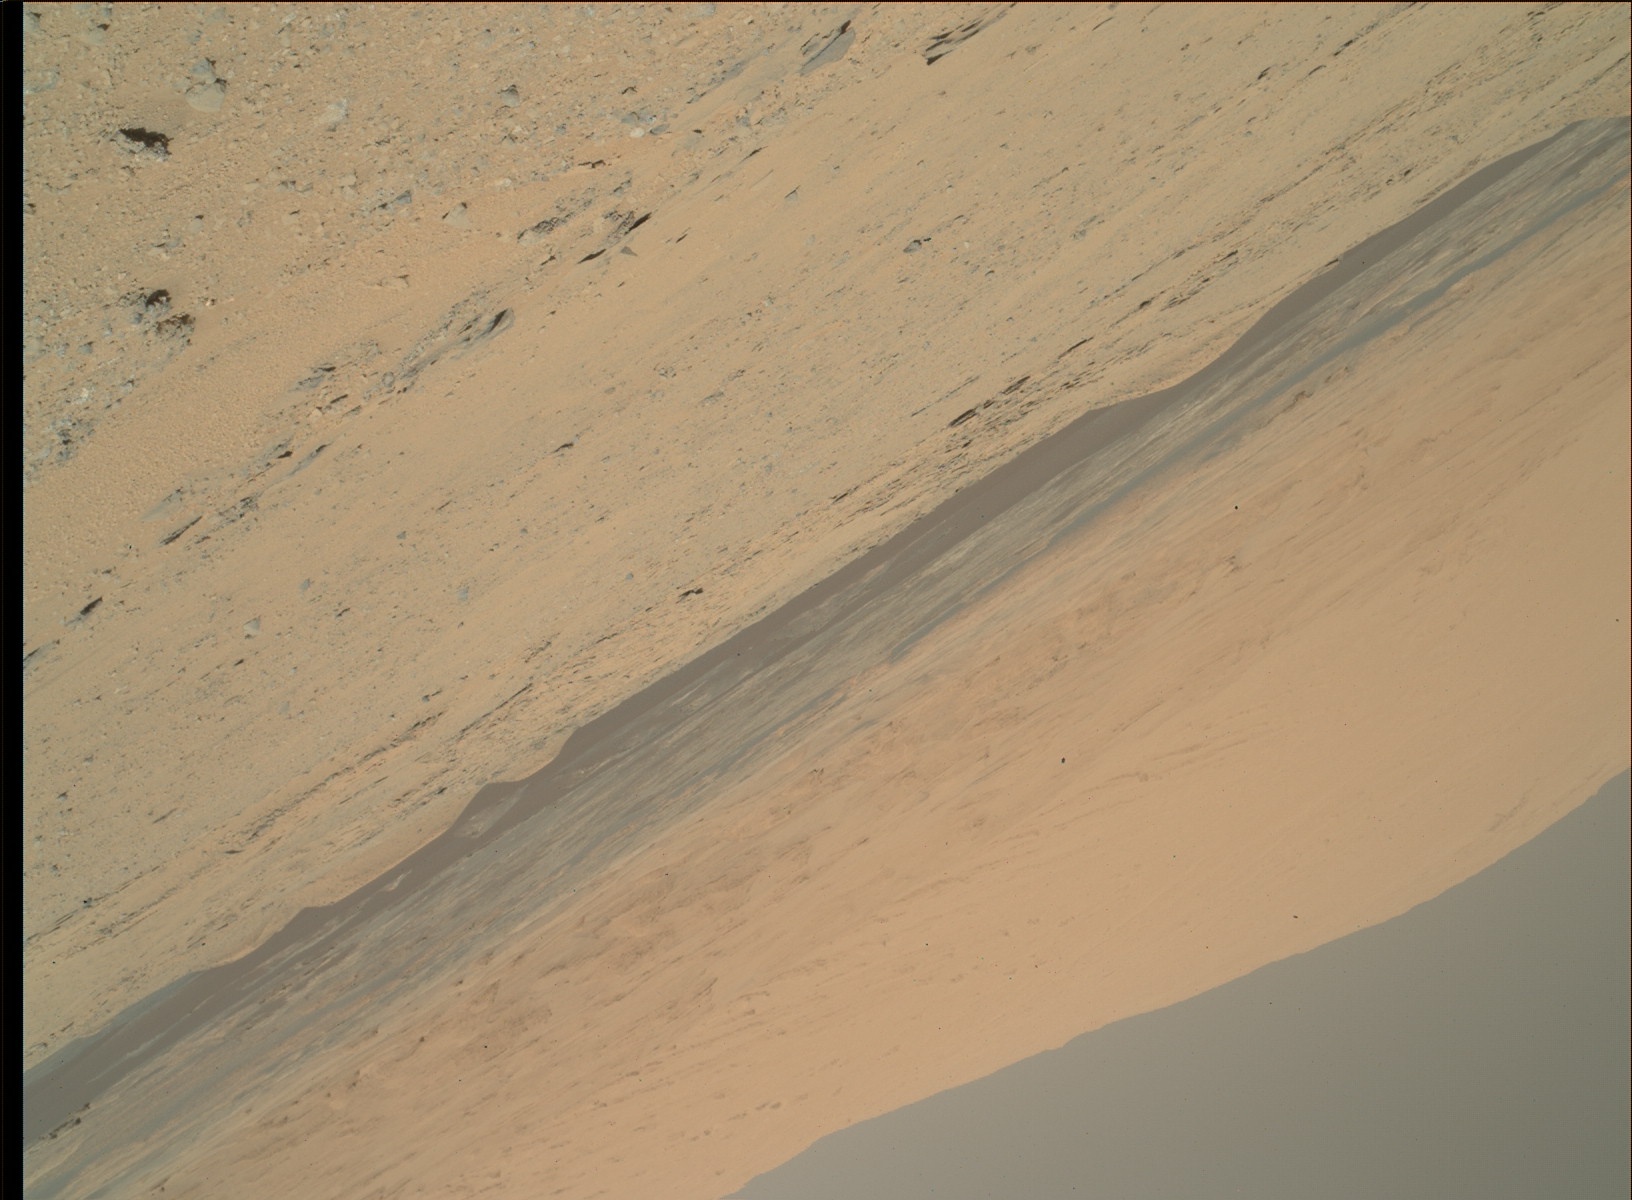 Nasa's Mars rover Curiosity acquired this image using its Mars Hand Lens Imager (MAHLI) on Sol 589